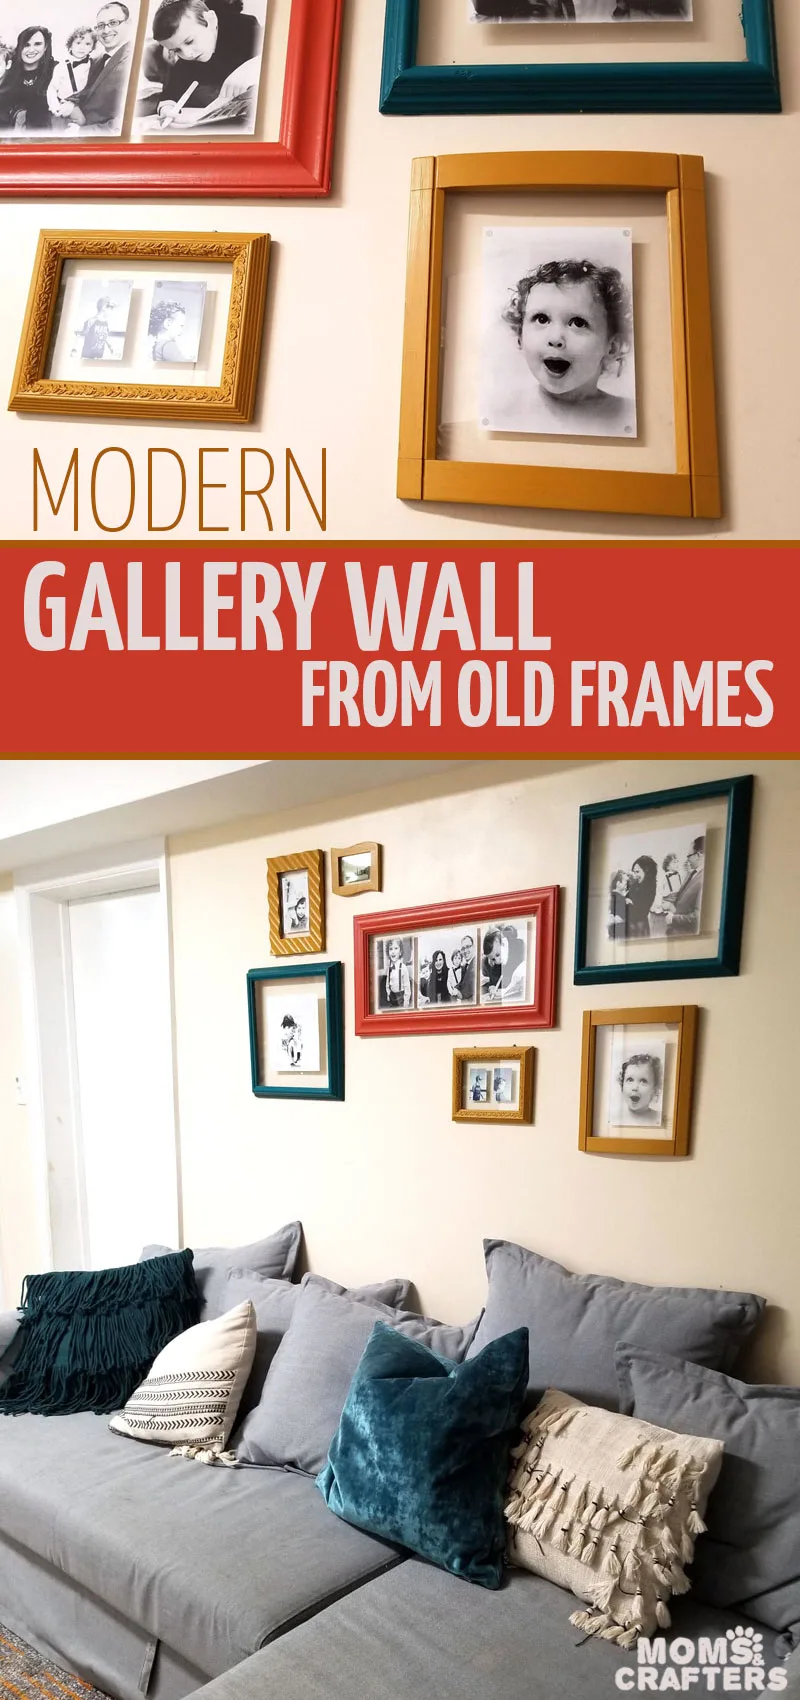 Click to learn how to create your own modern DIY gallery wall from old upcycled frames. These repurposed frames make beautiful contemporary home decor with a pop of color and an easy DIY gallery wall layout idea. #gallerywall #homedecor #upcycled